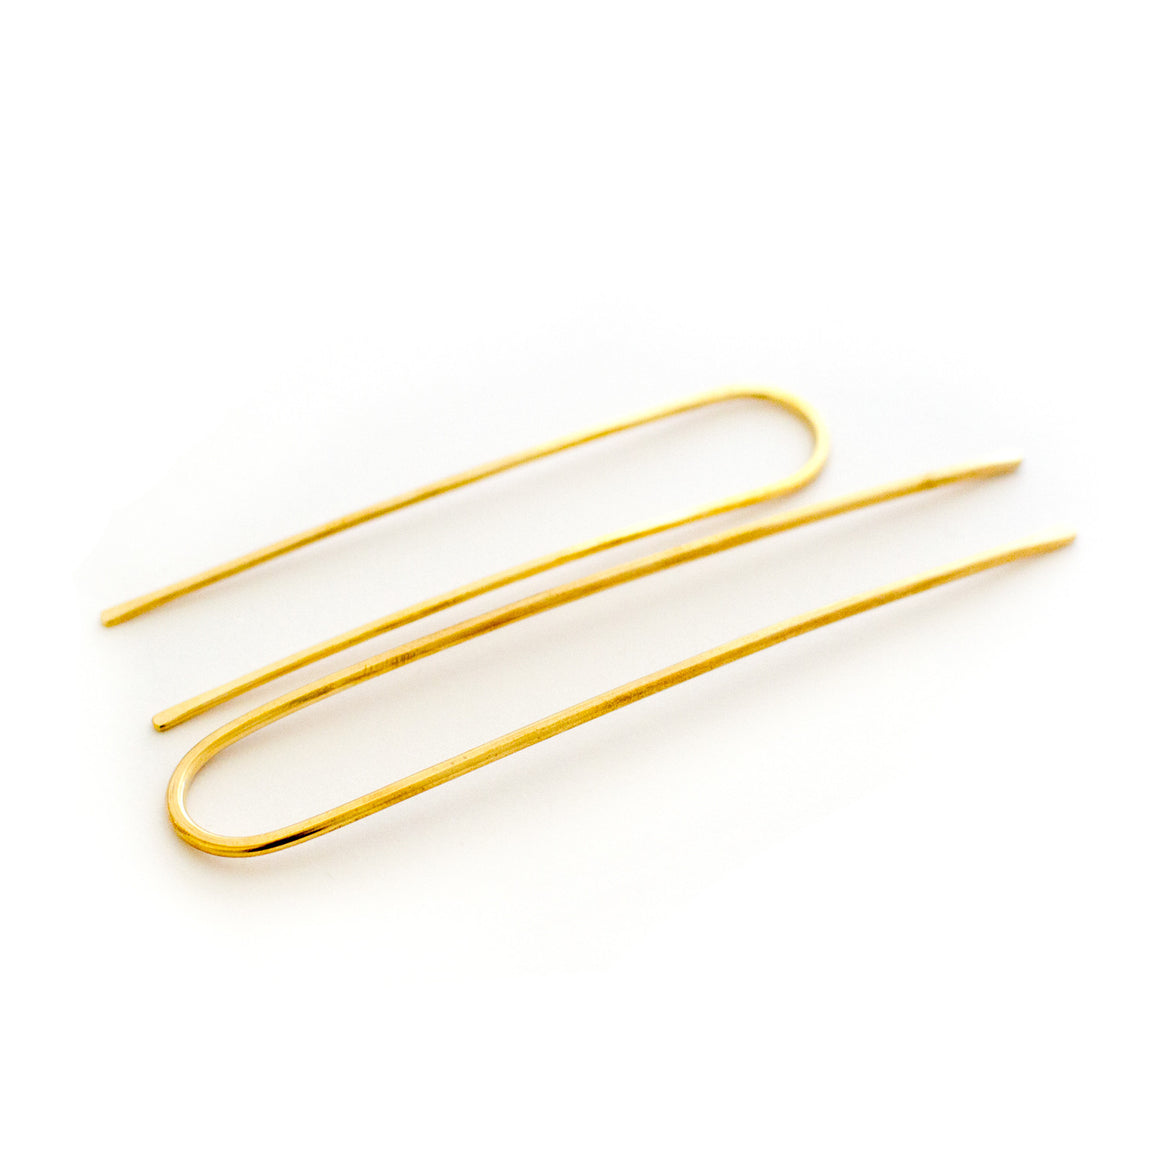 hair pins for buns top knots - made out of gold brass handmade in california by mane message